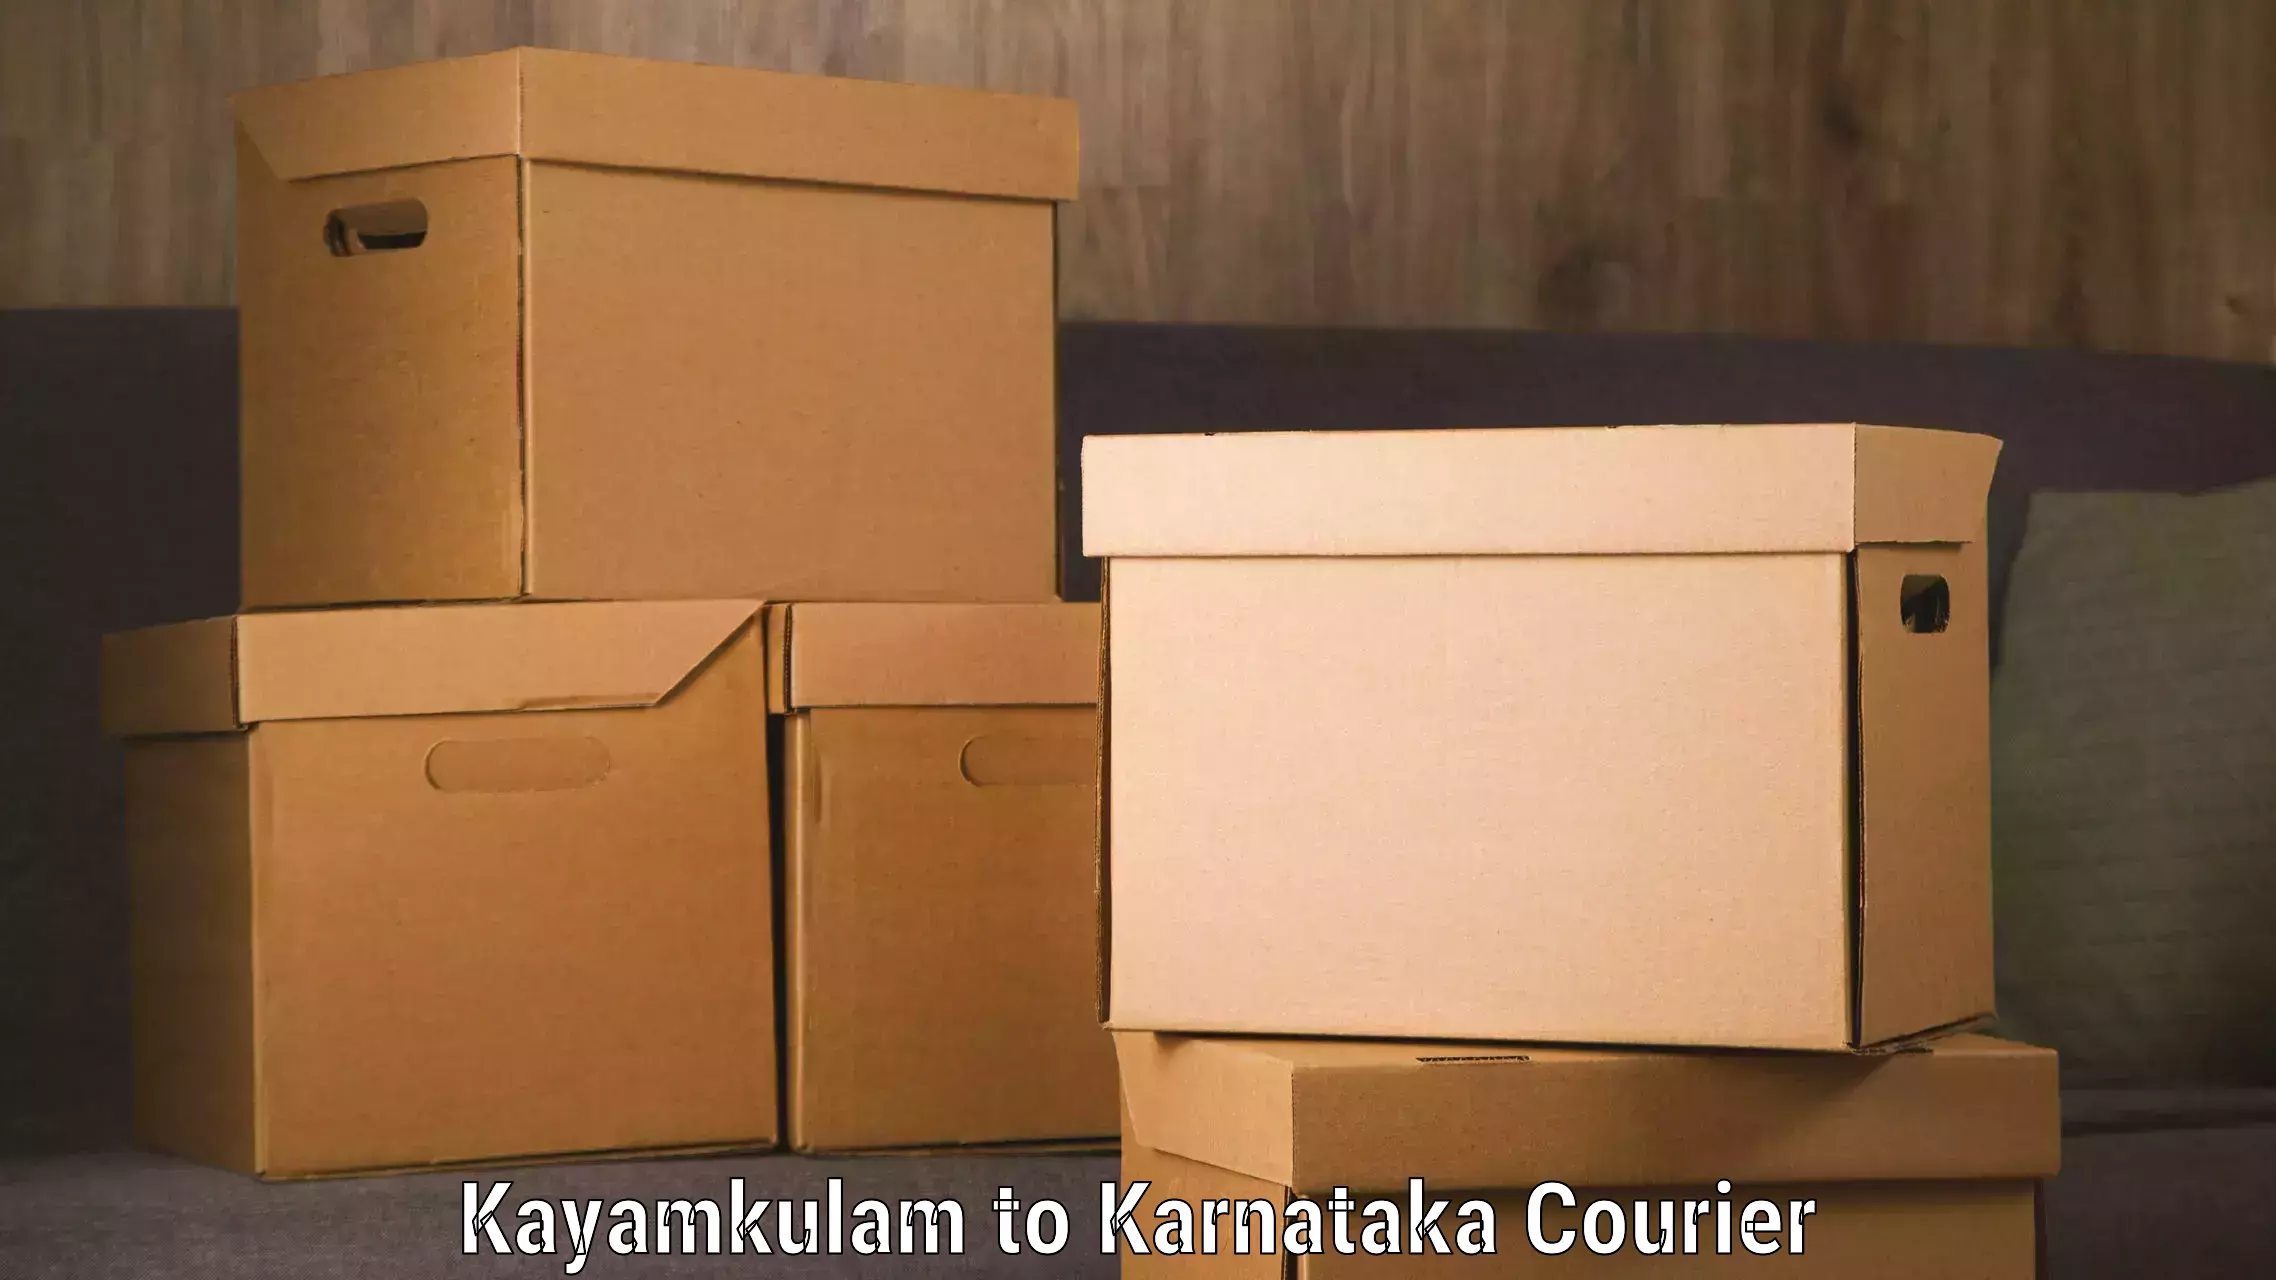 Flexible delivery schedules in Kayamkulam to Gurmatkal